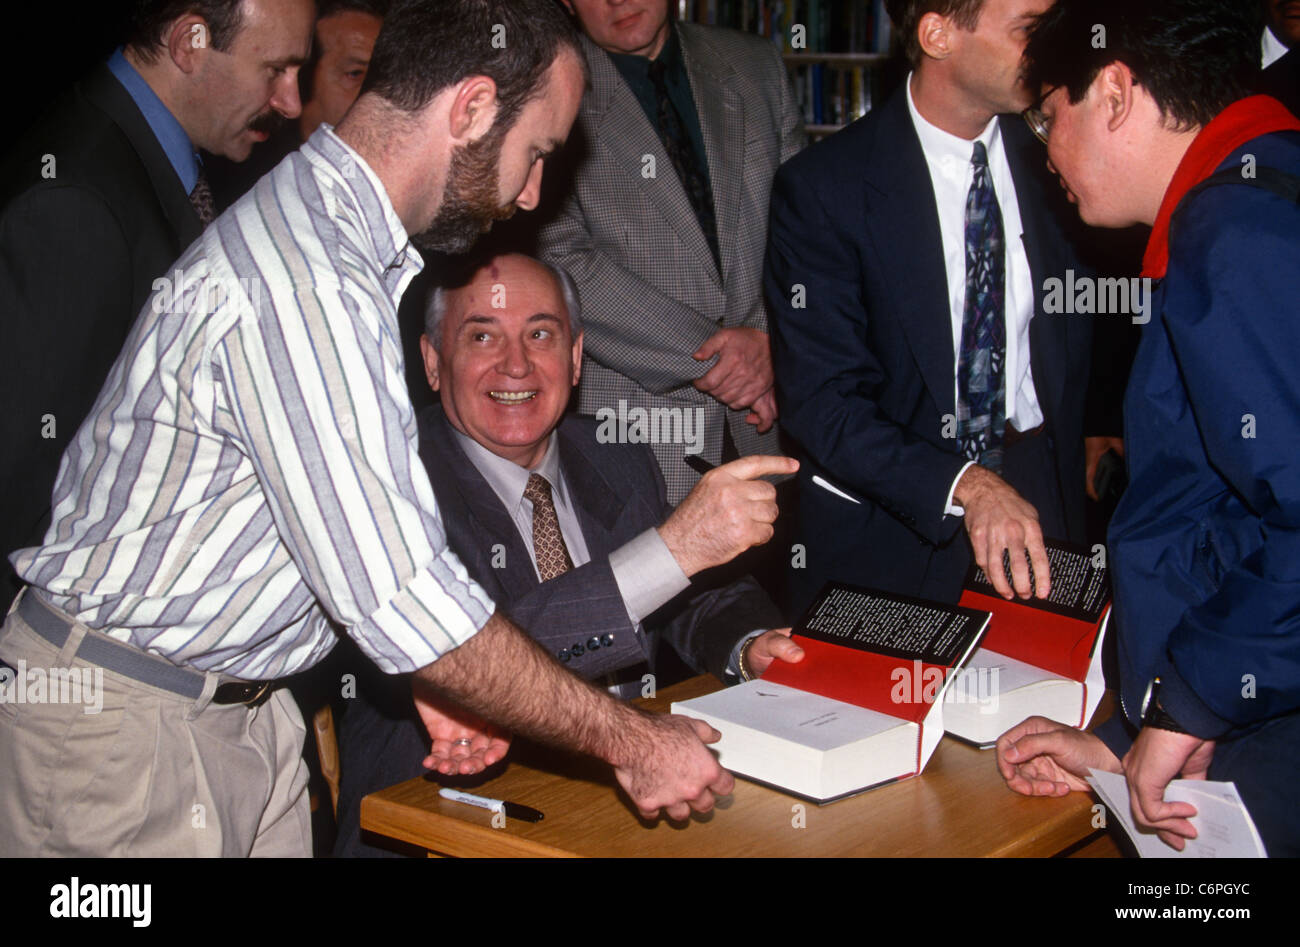 Former Soviet President Mikhail Gorbachev, with his distinctive port-wine stain on his head, smiles as he signs copies of his new autobiography 'Memoirs' at Borders Books & Music, October 25, 1996 in Washington, D.C. Stock Photo